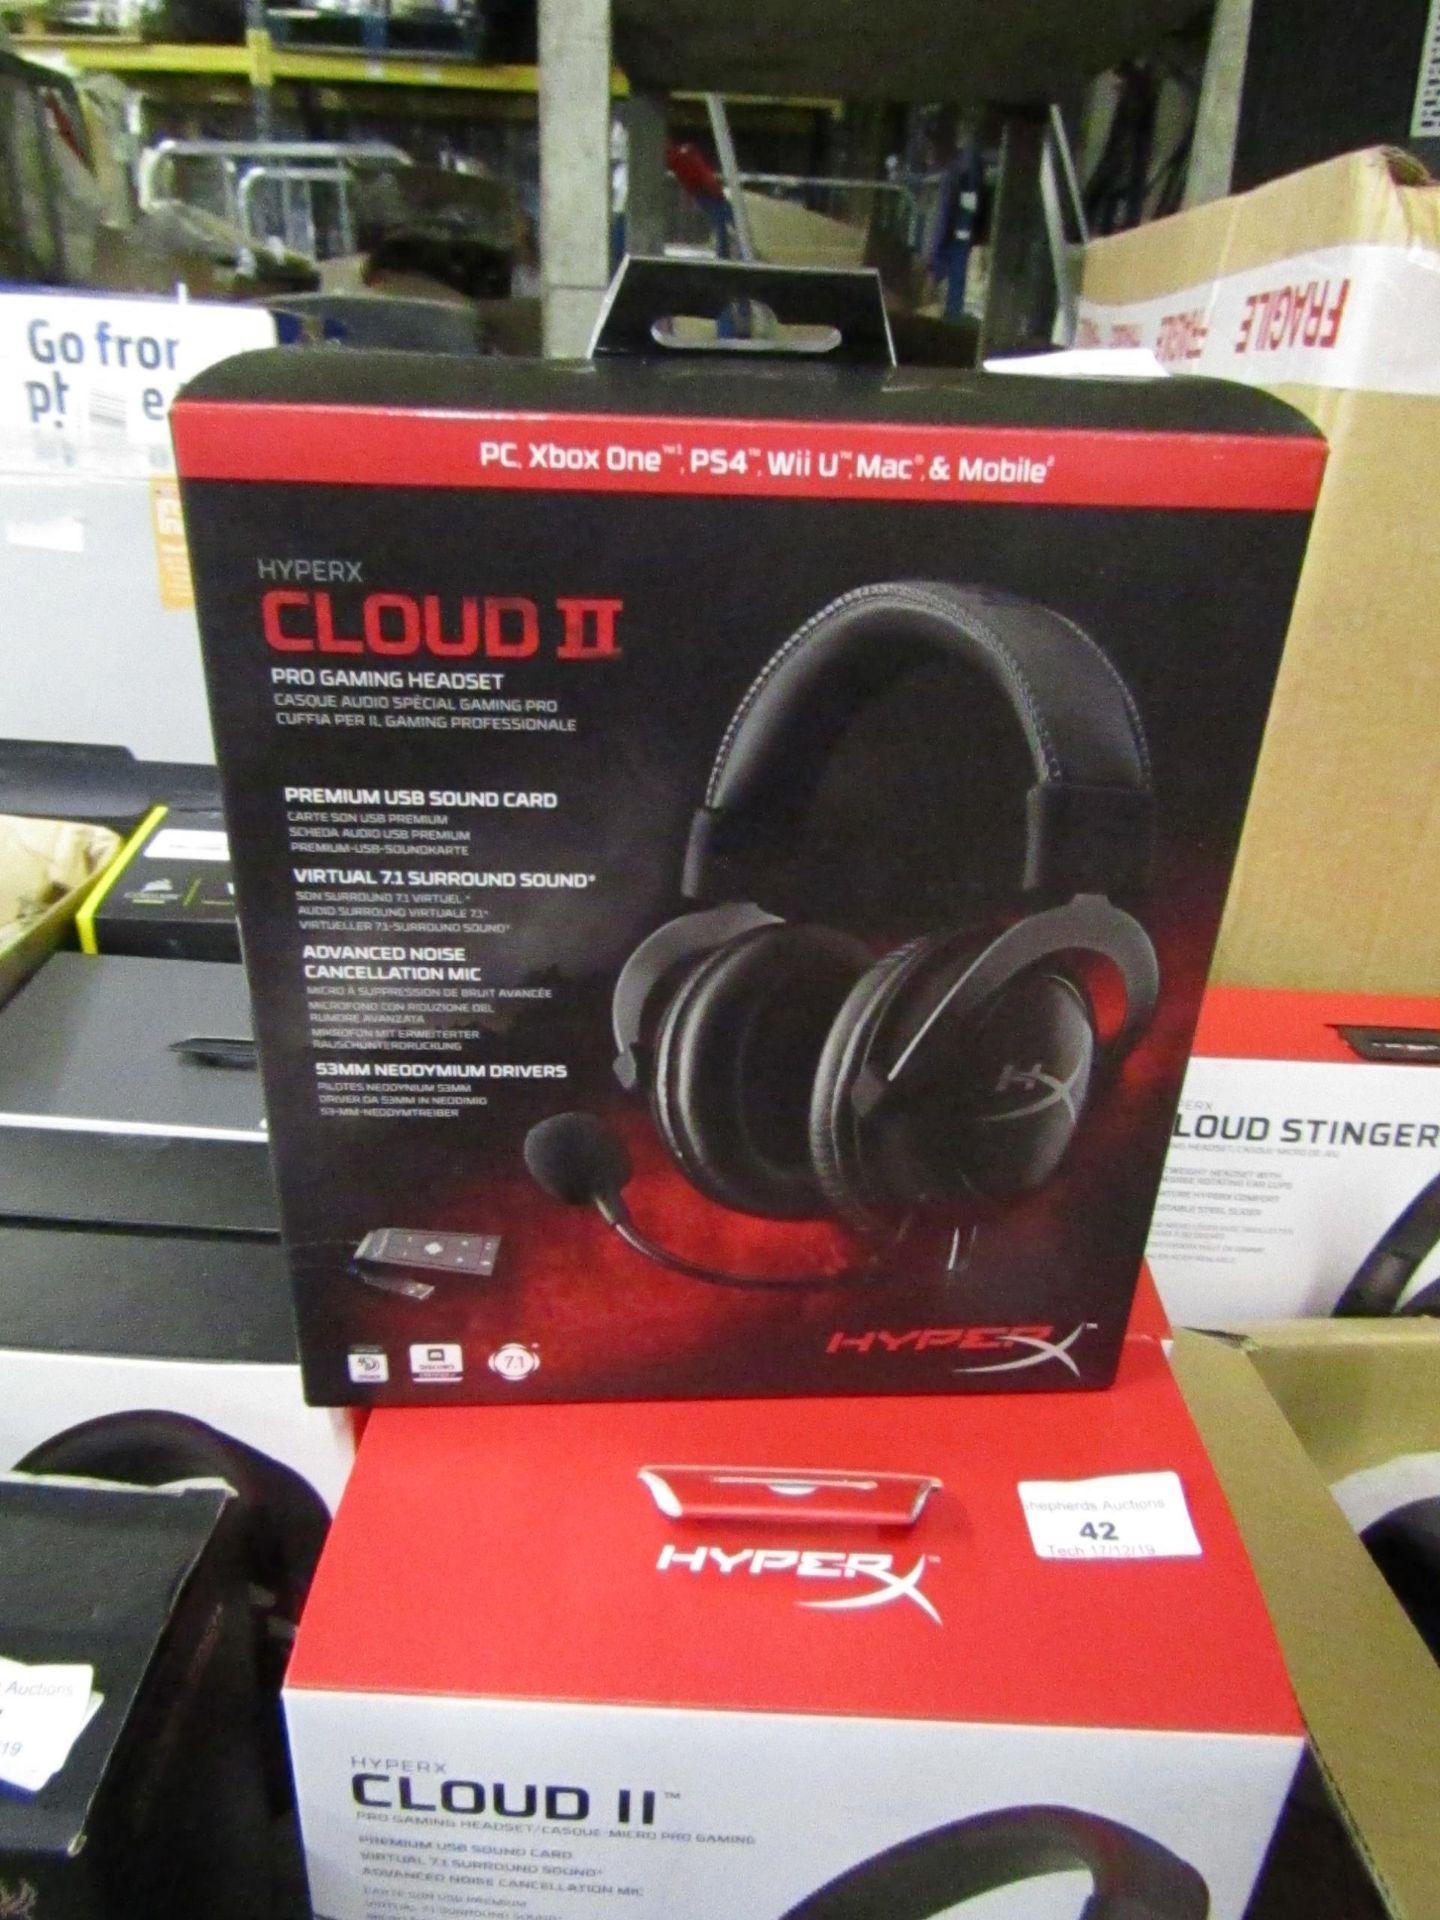 Hyperx Cloud 2 Pro Gaming headset, boxed and unchecked